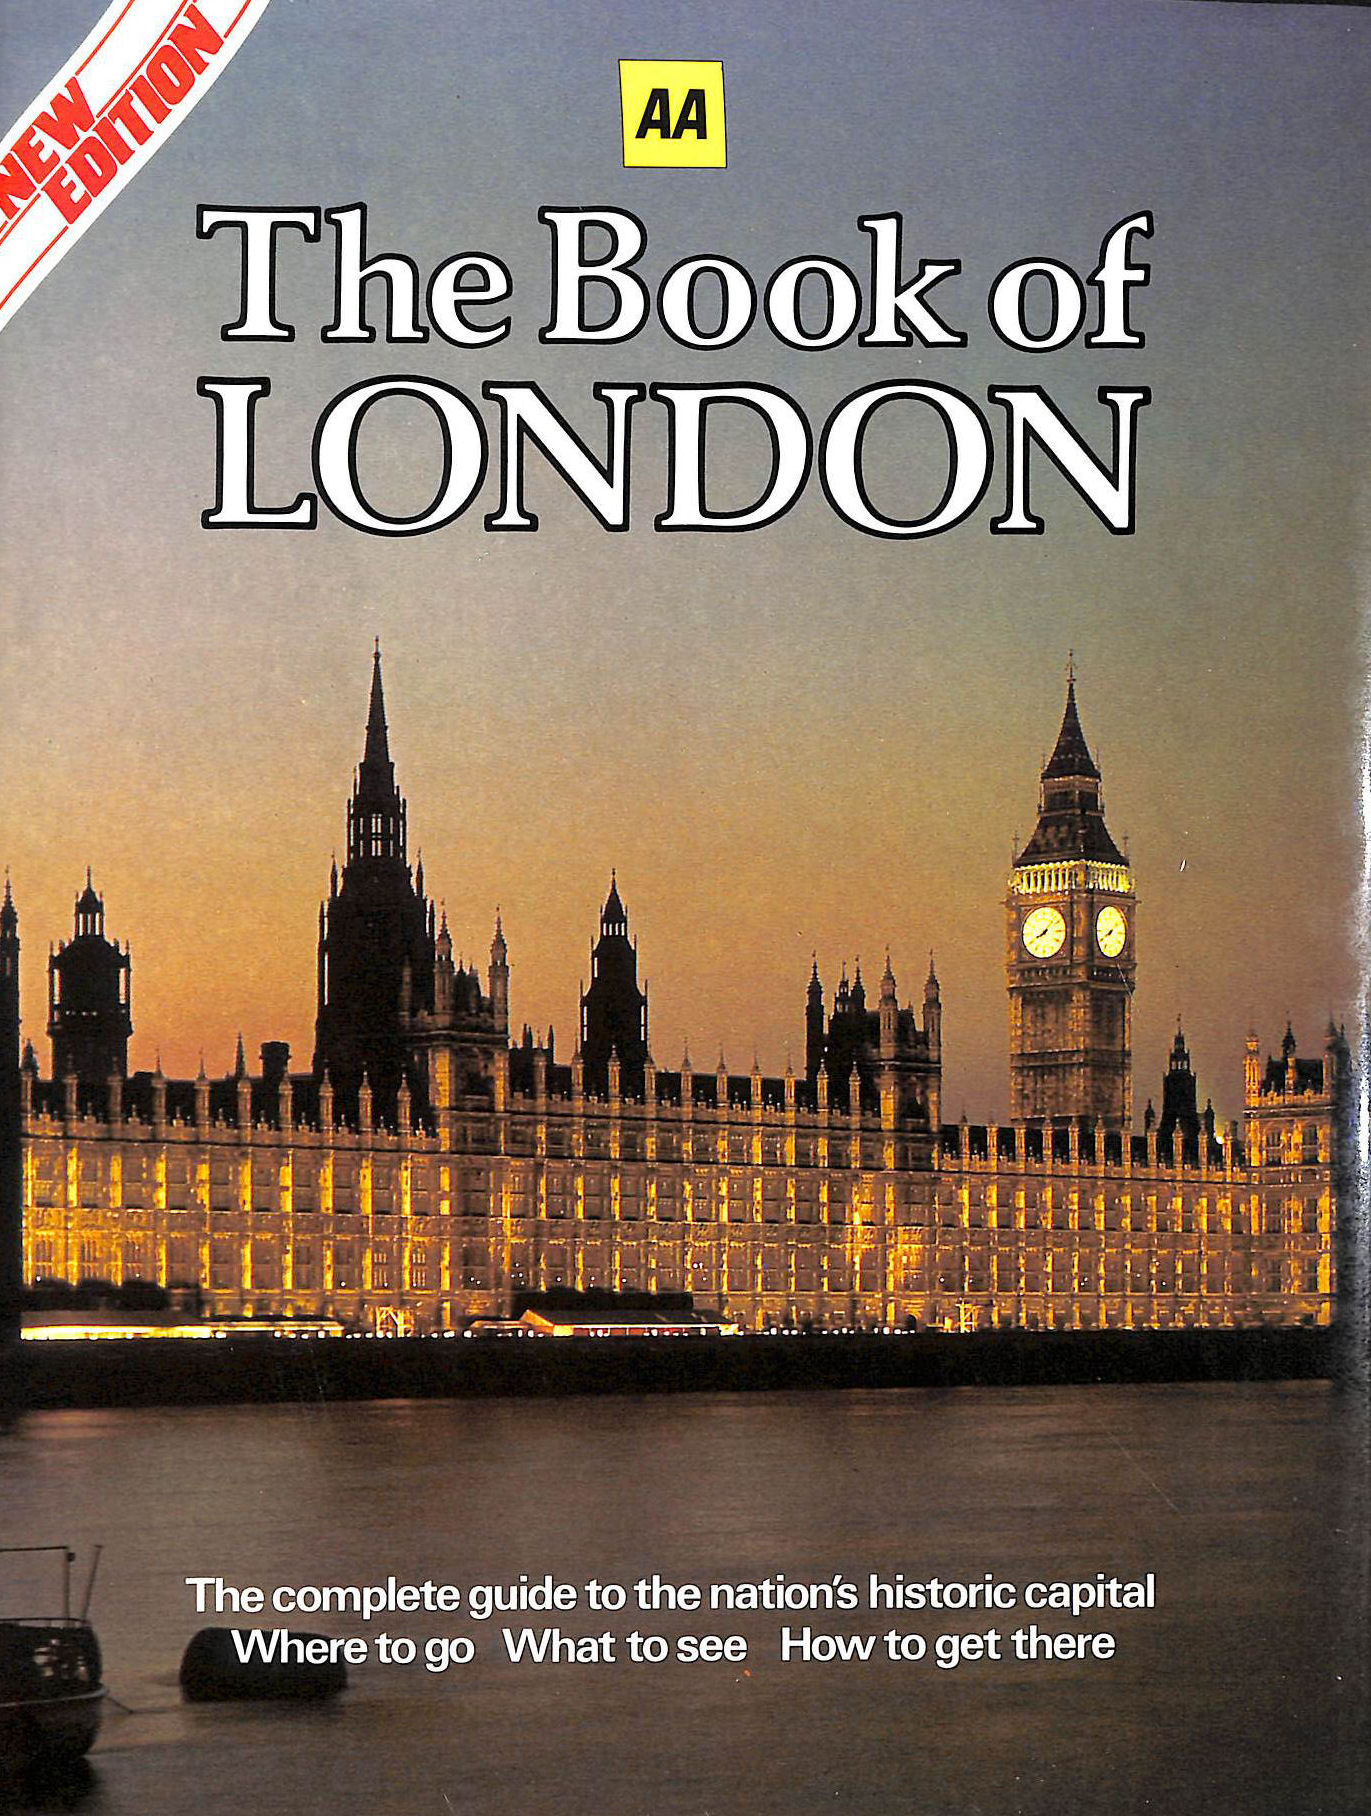 A.A. - AA The Book of London